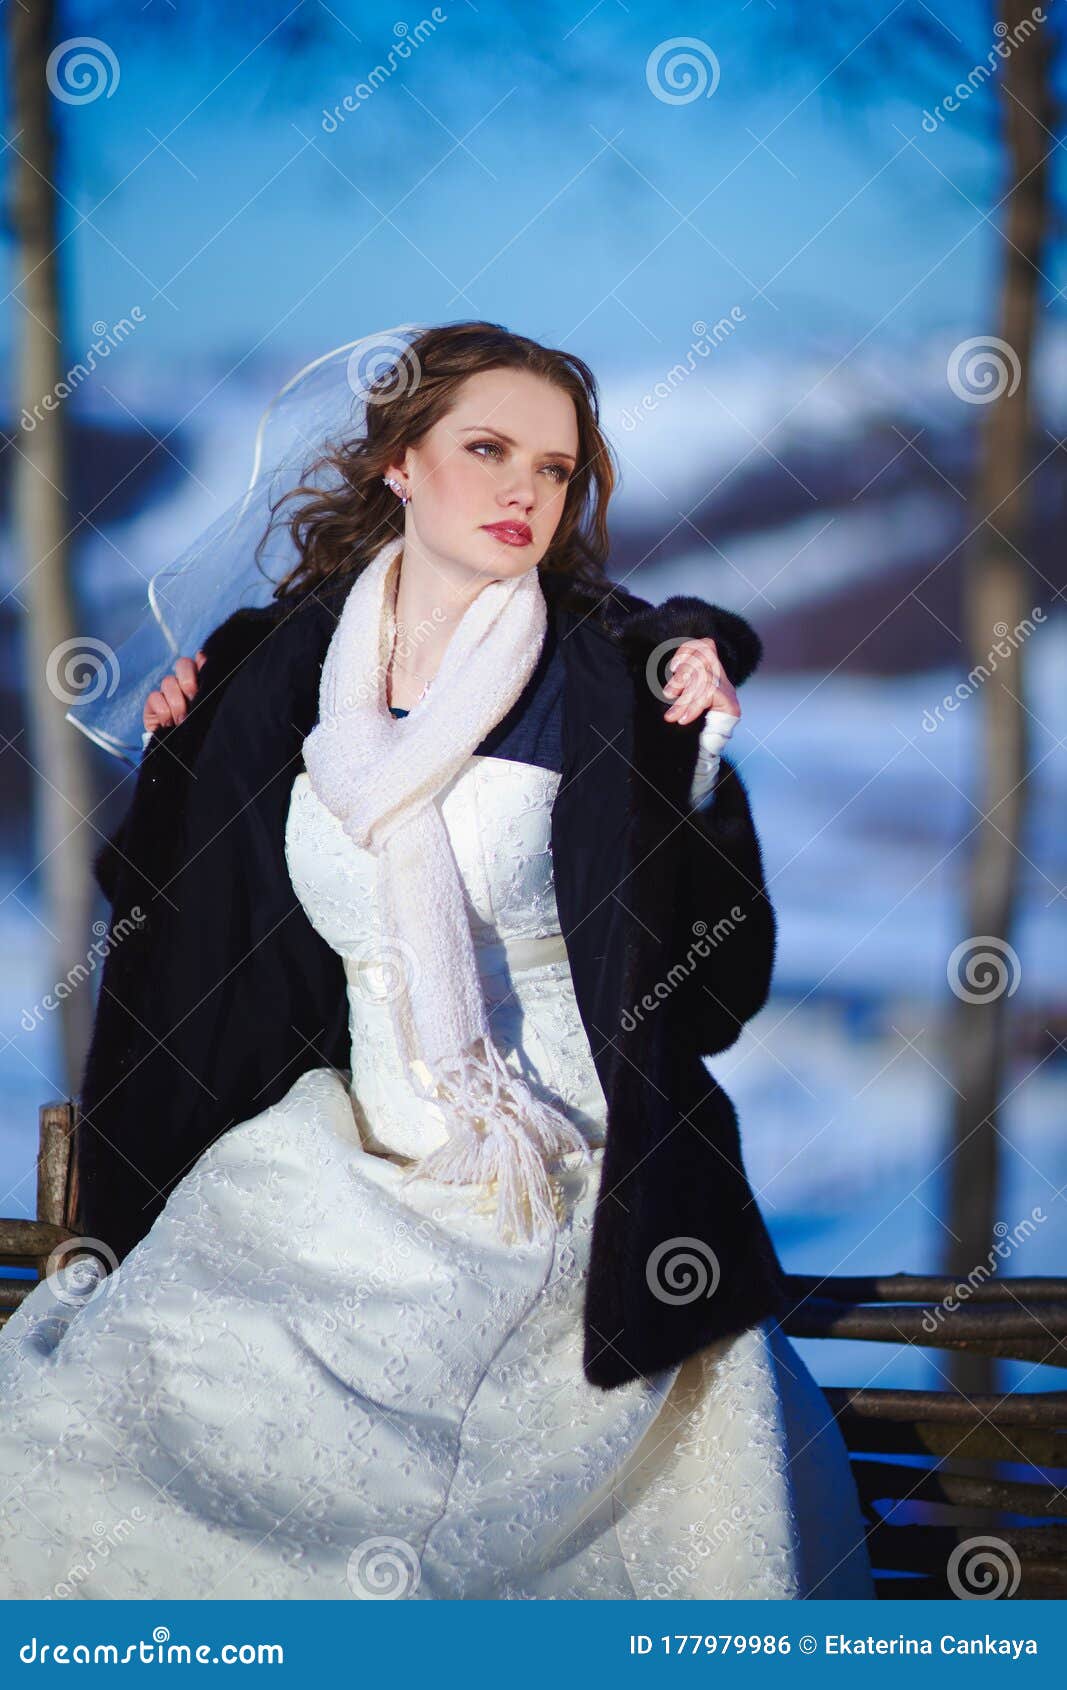 https://thumbs.dreamstime.com/z/beautiful-russian-bride-cold-winter-fur-snow-mountain-background-177979986.jpg